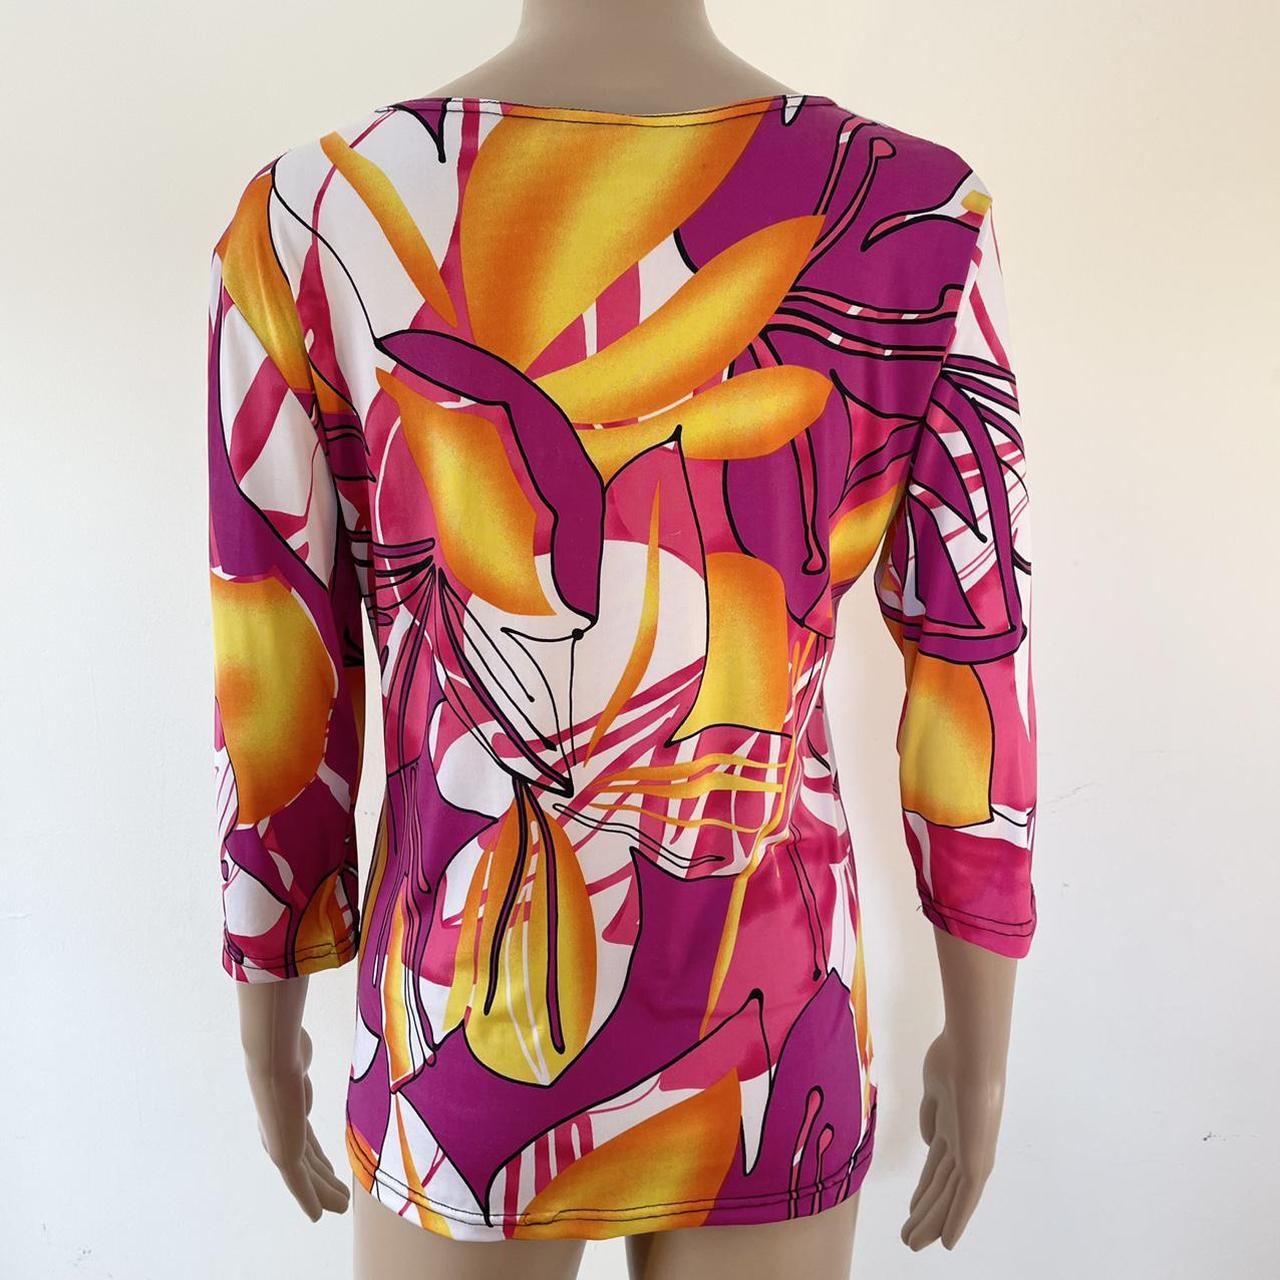 Product Image 3 - Vintage '90s Hawaiian Top

By "Wow"